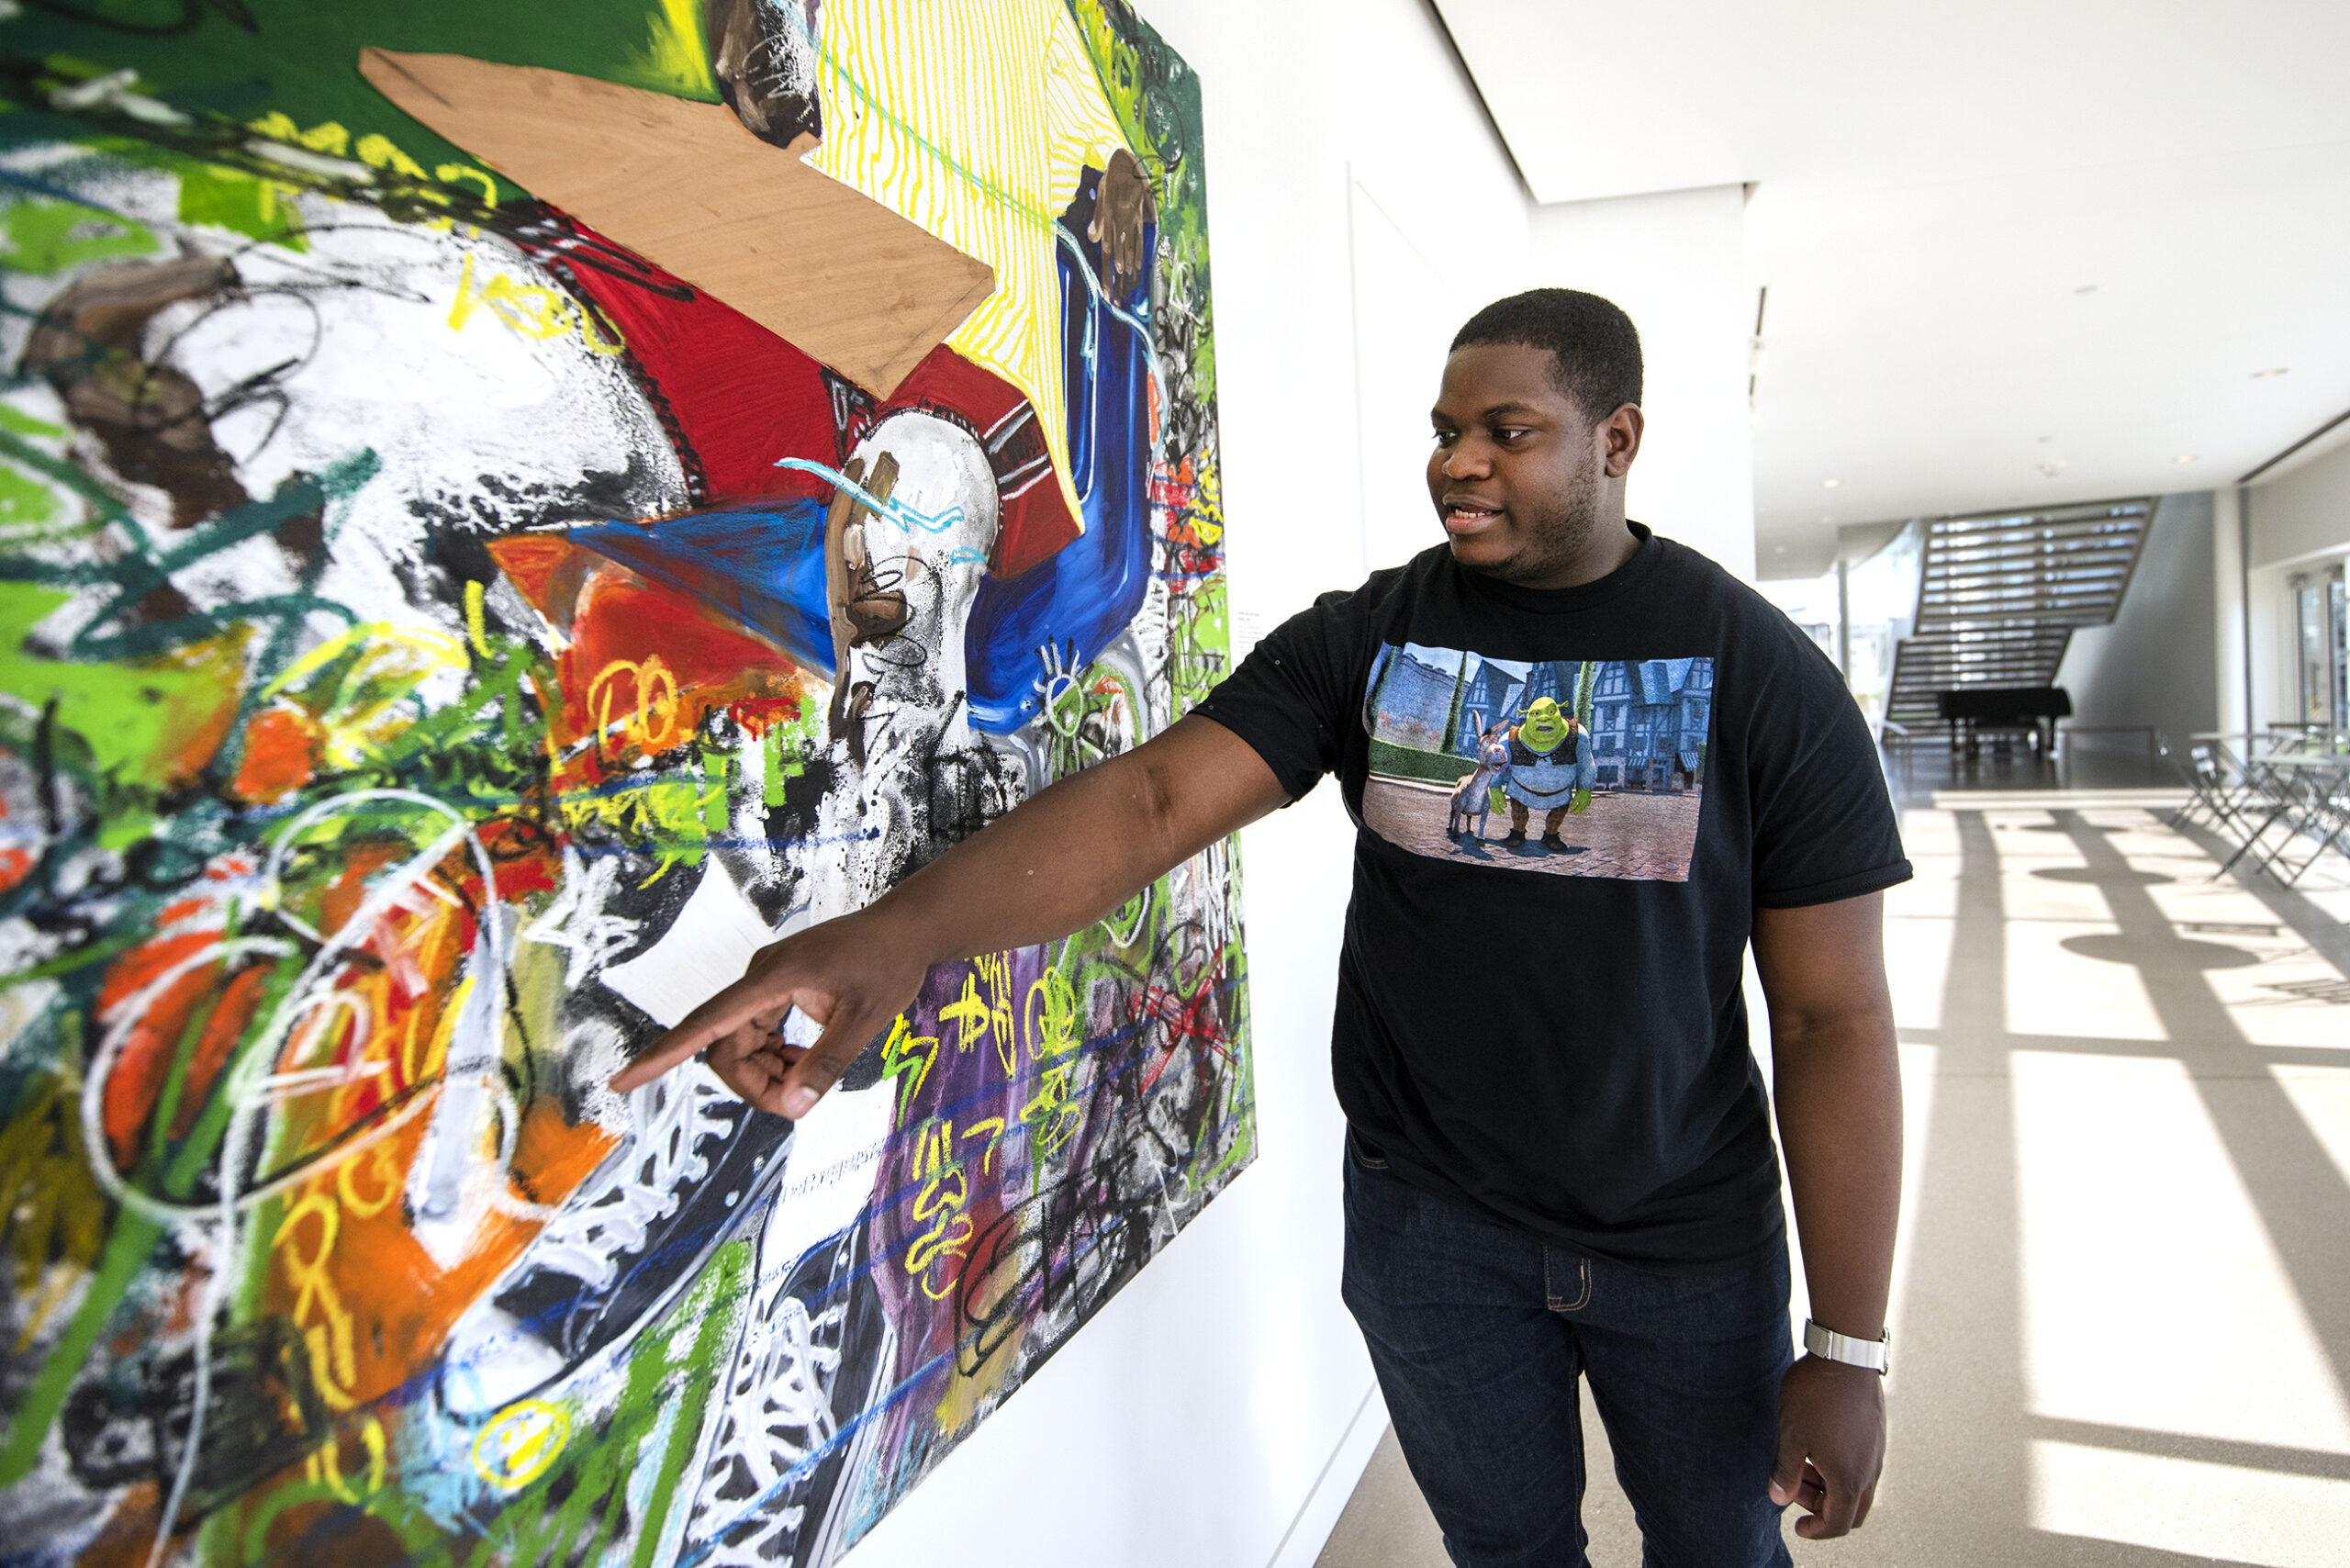 Khari Turner points to colorful details, many layered on top of the other, during a tour.